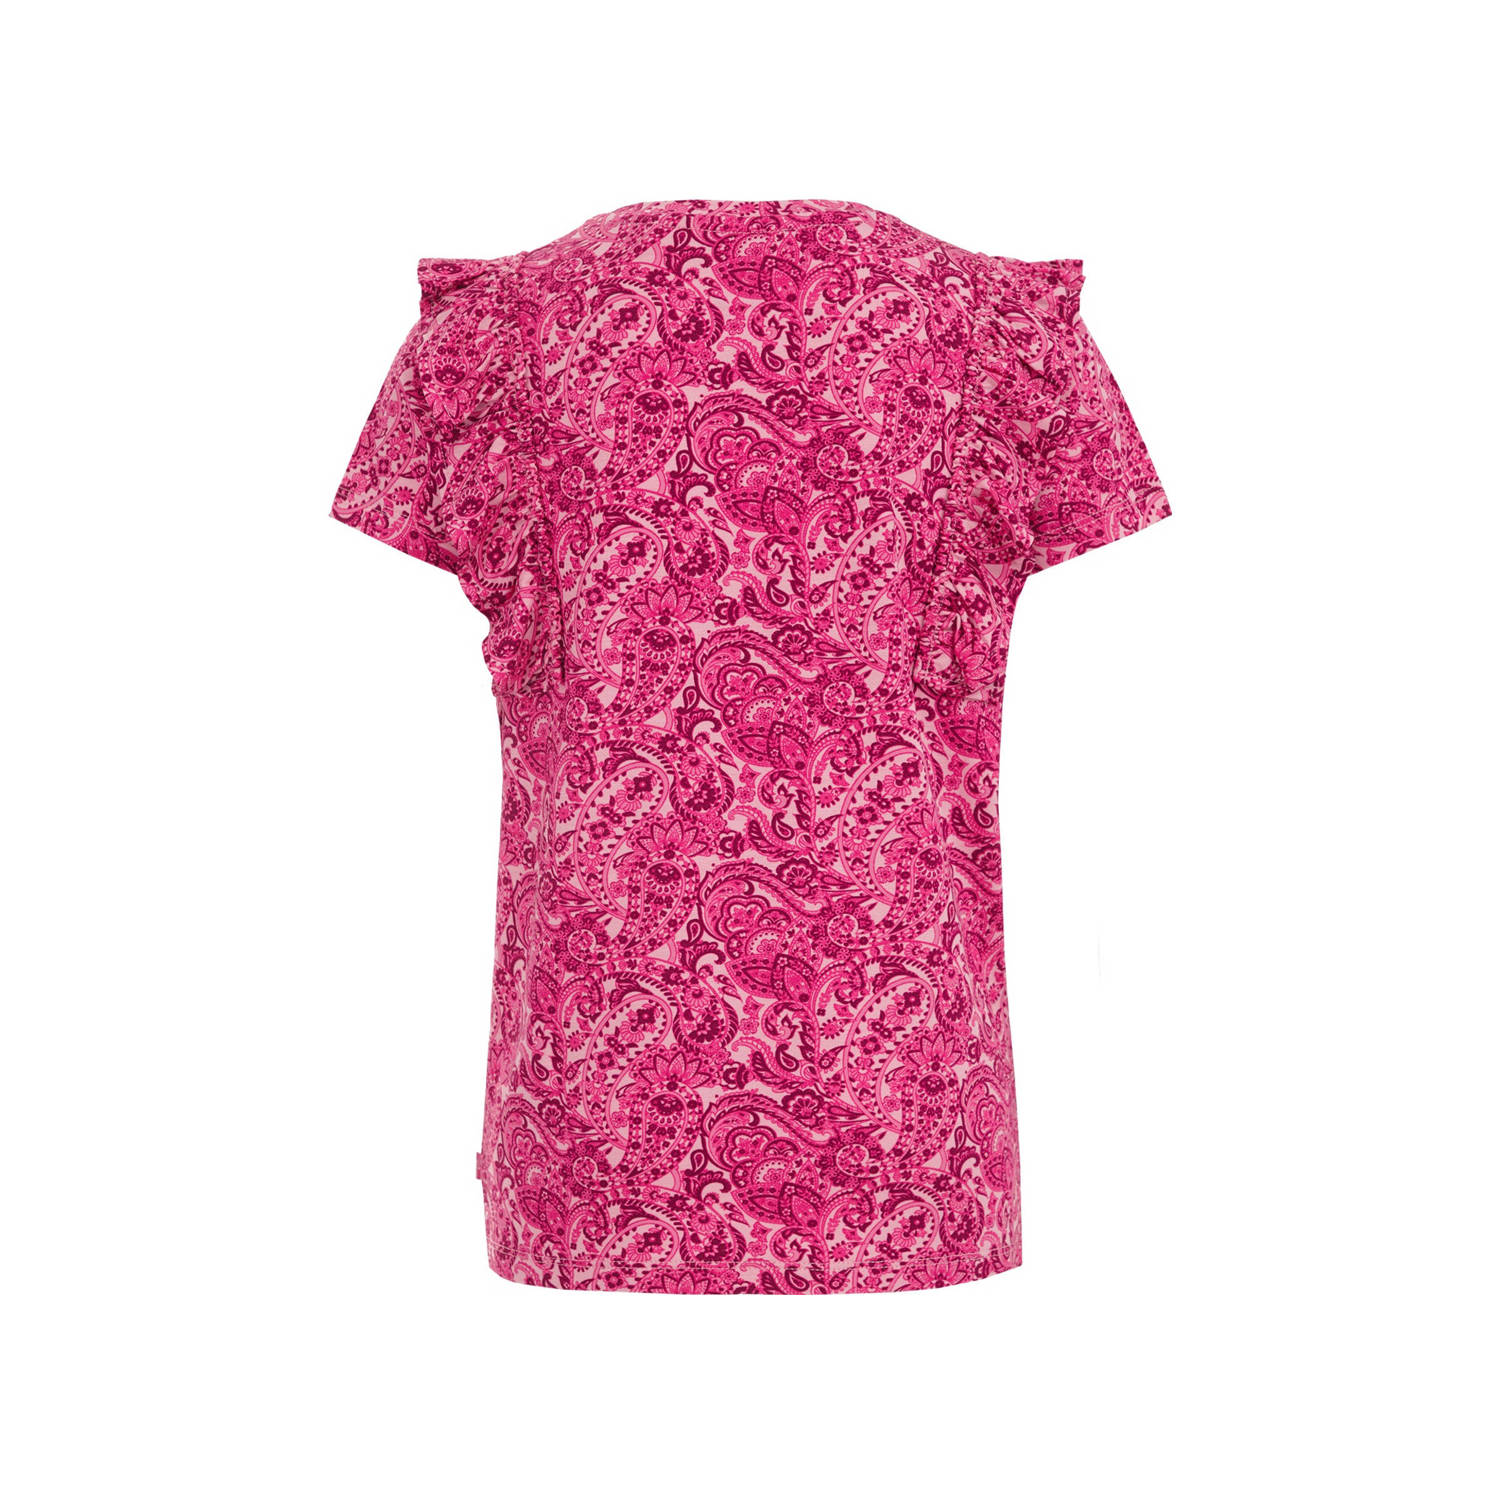 WE Fashion T-shirt met all over print en ruches roze